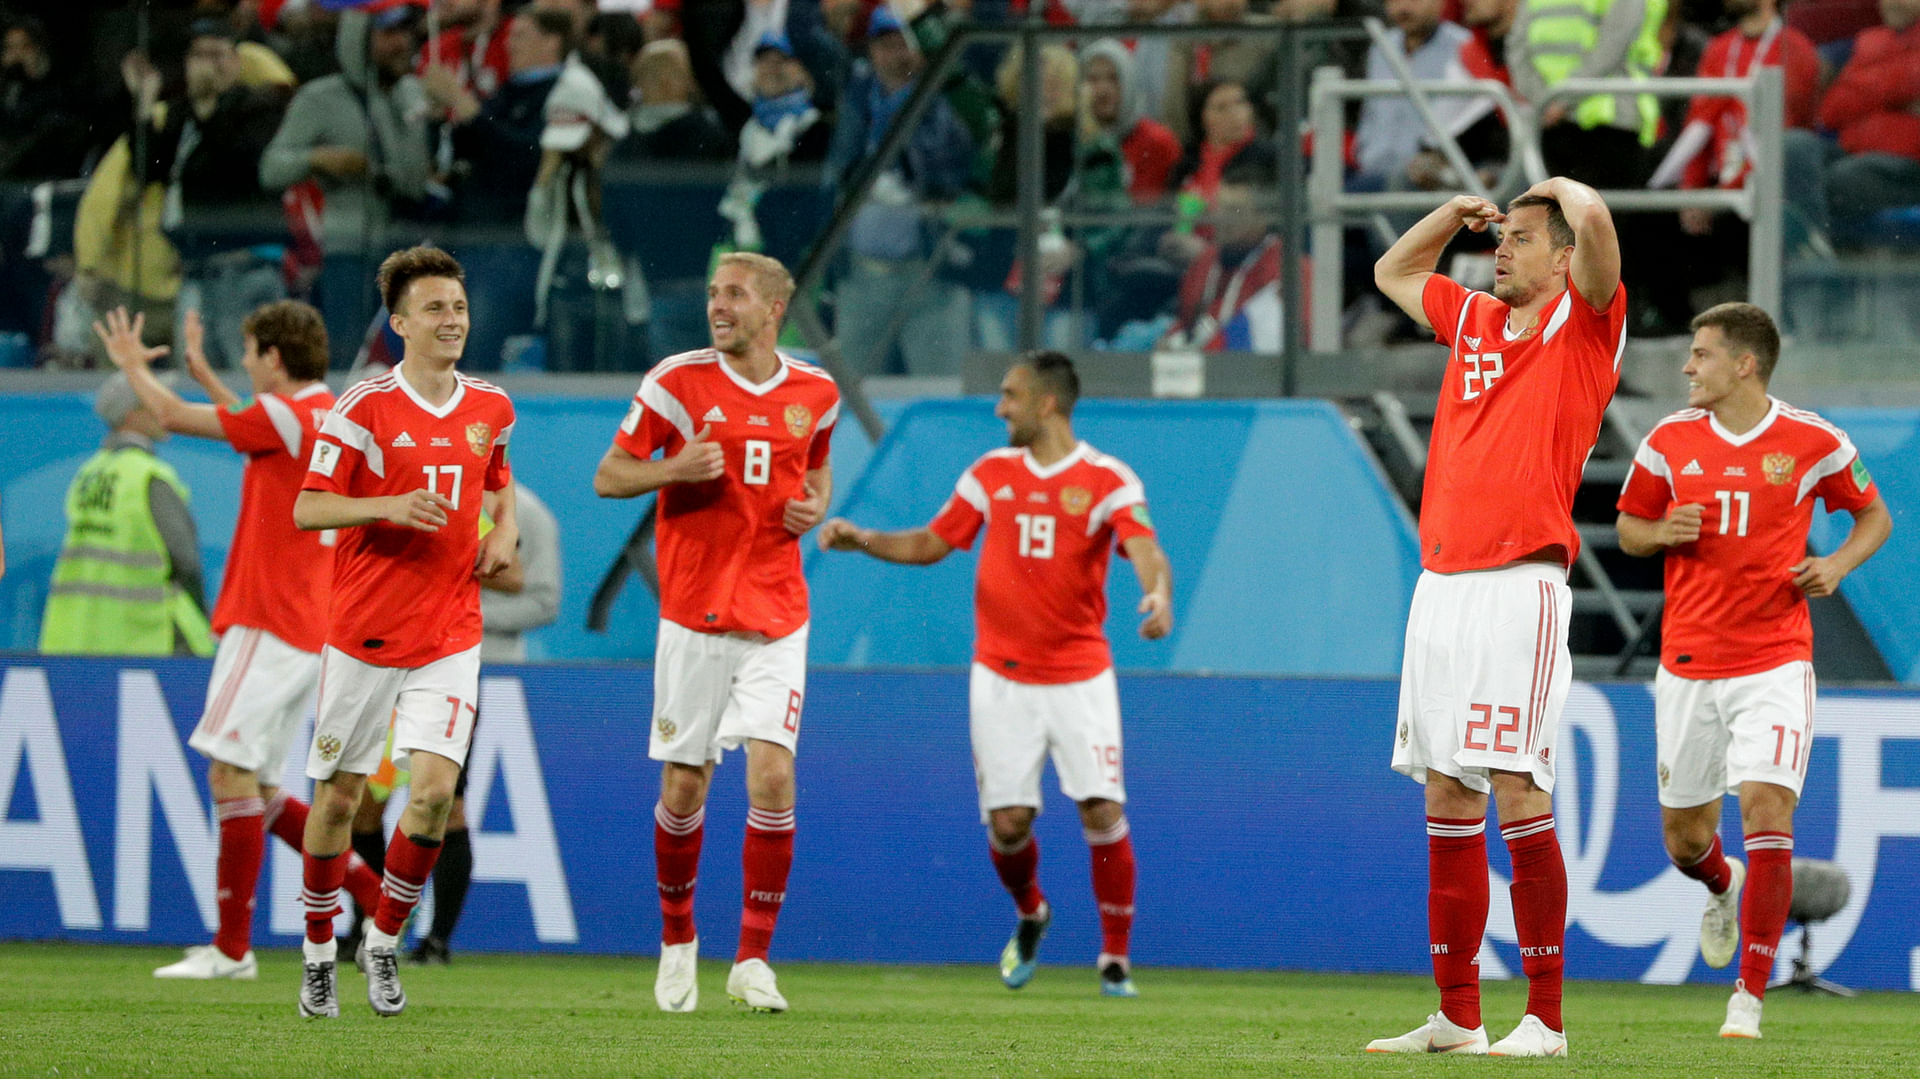 The Russian team has run rampant in the World Cup so far, with 8 goals in 2 games.